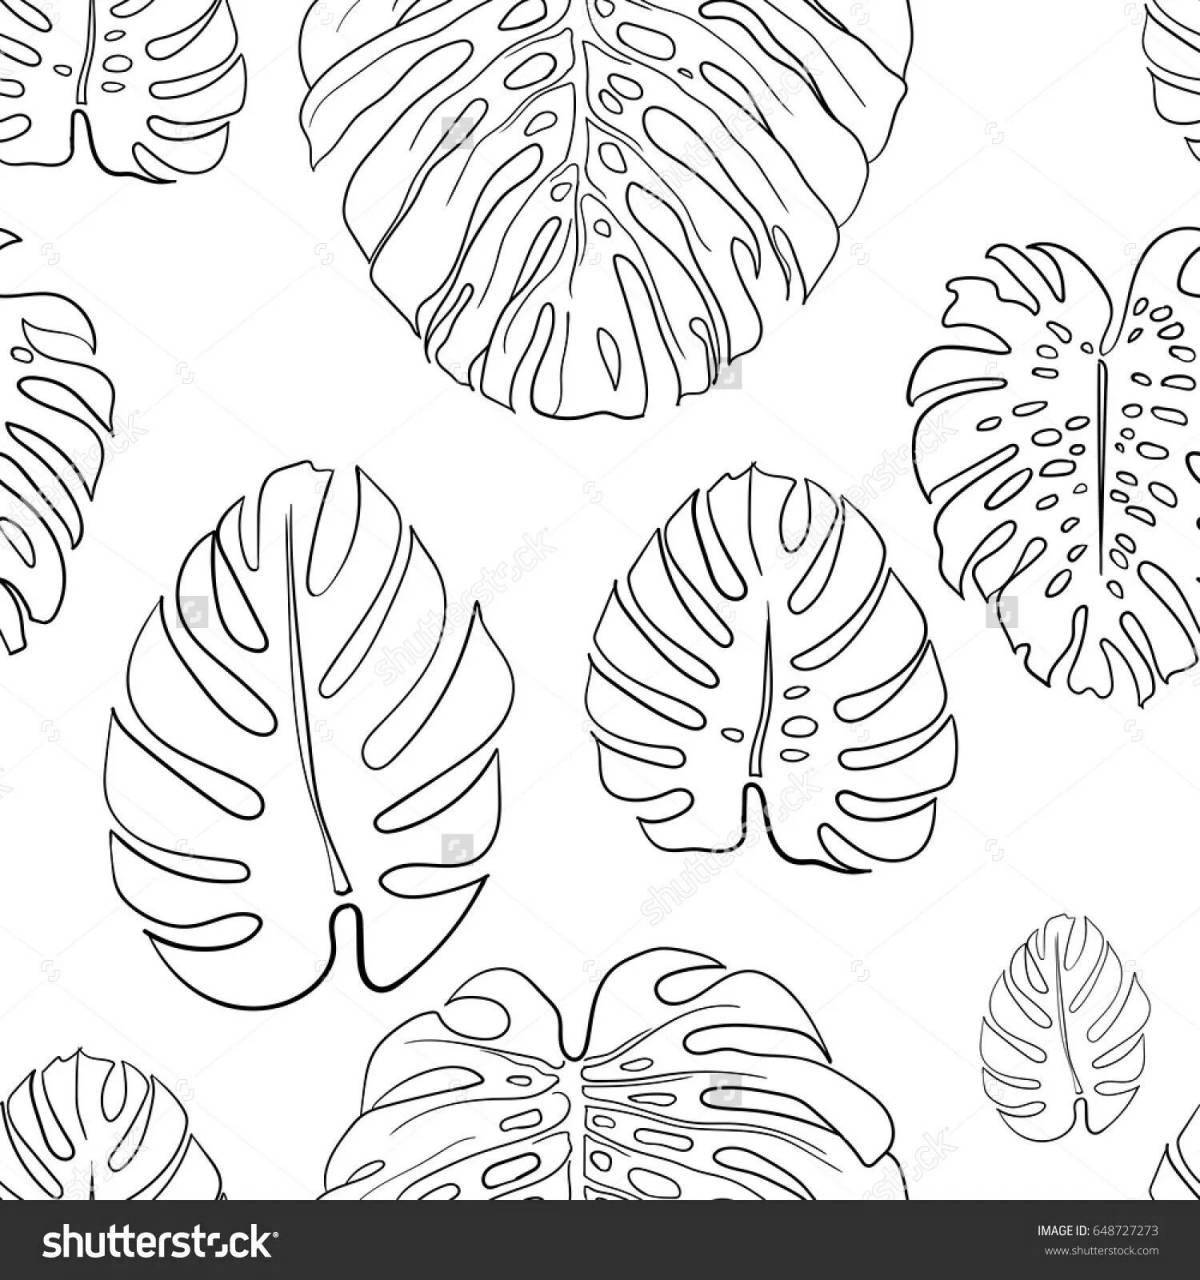 Inviting monstera leaf coloring page